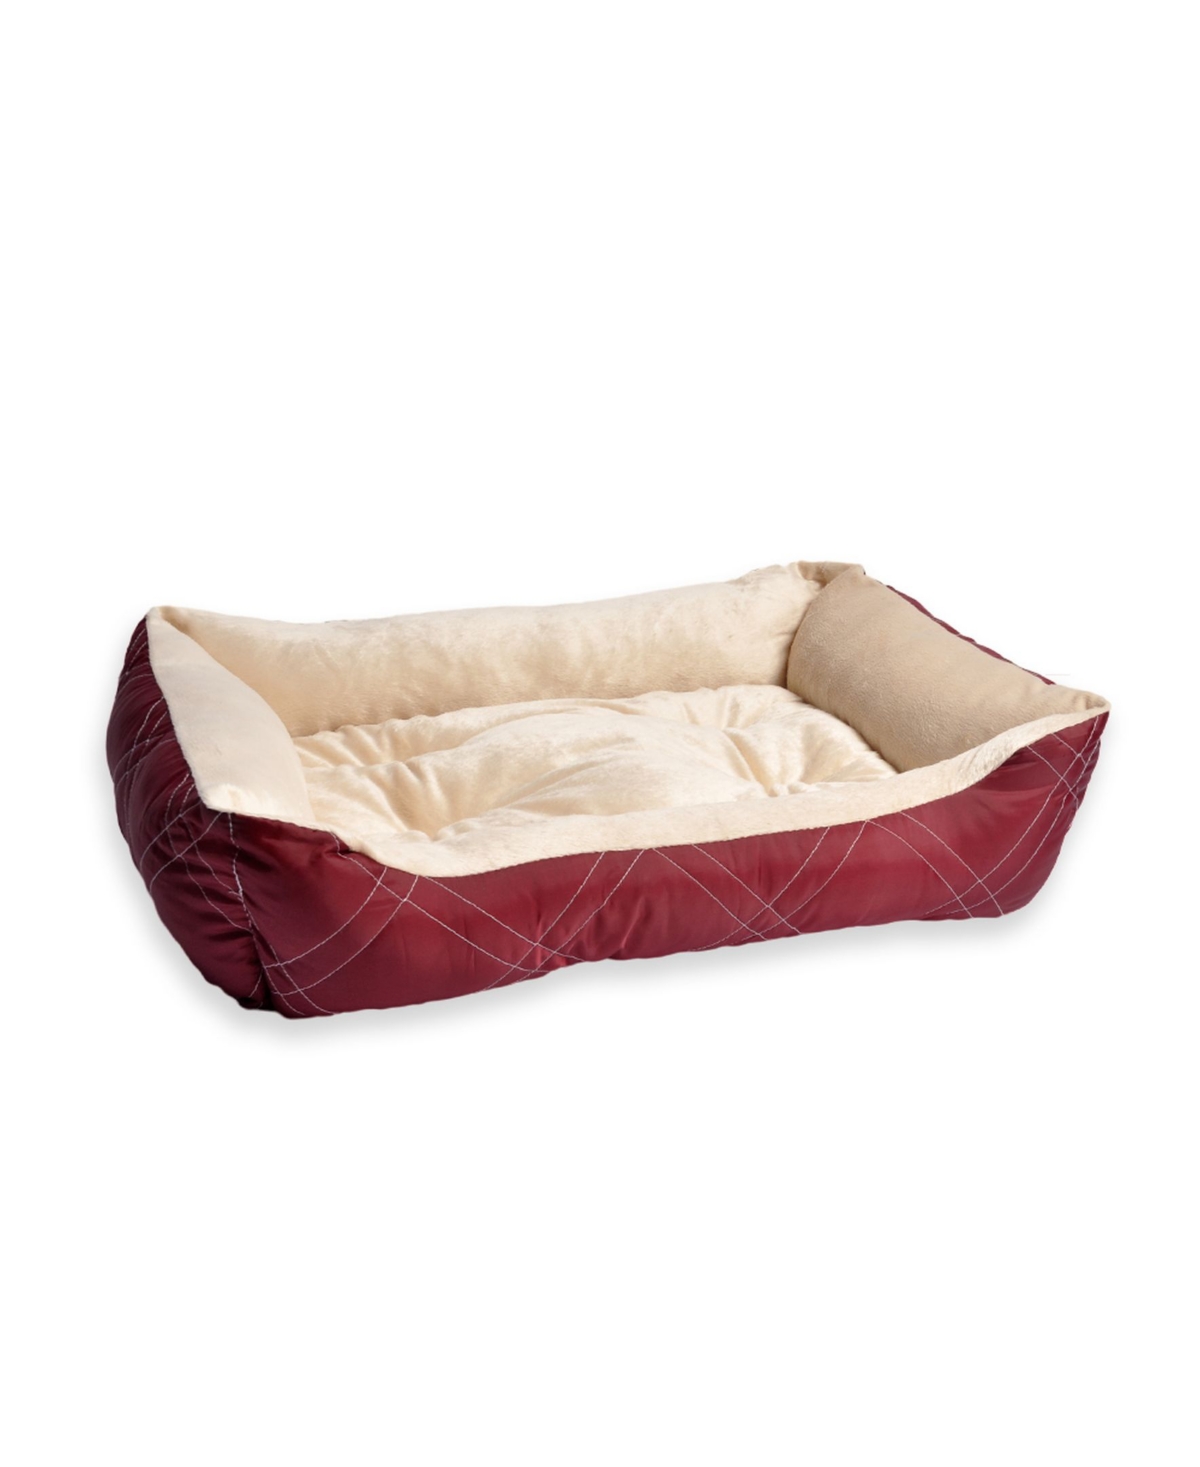 Happycare Textiles All Season Reversible Pet Bolster Pet Bed, Medium Size - Red